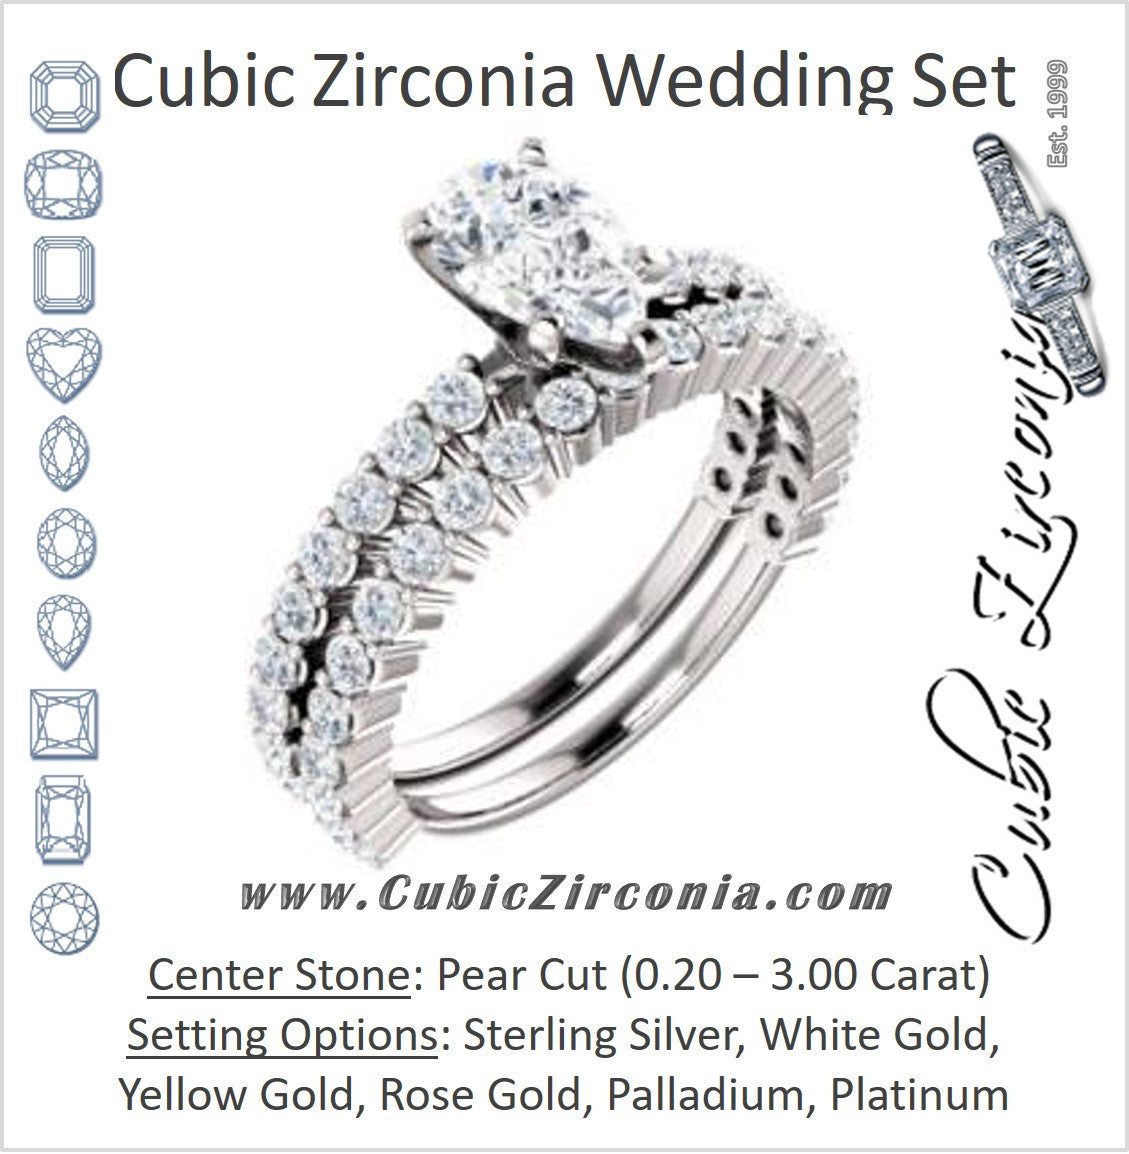 CZ Wedding Set, featuring The Thea engagement ring (Customizable 8-prong Pear Cut Design with Thin, Stackable Pavé Band)